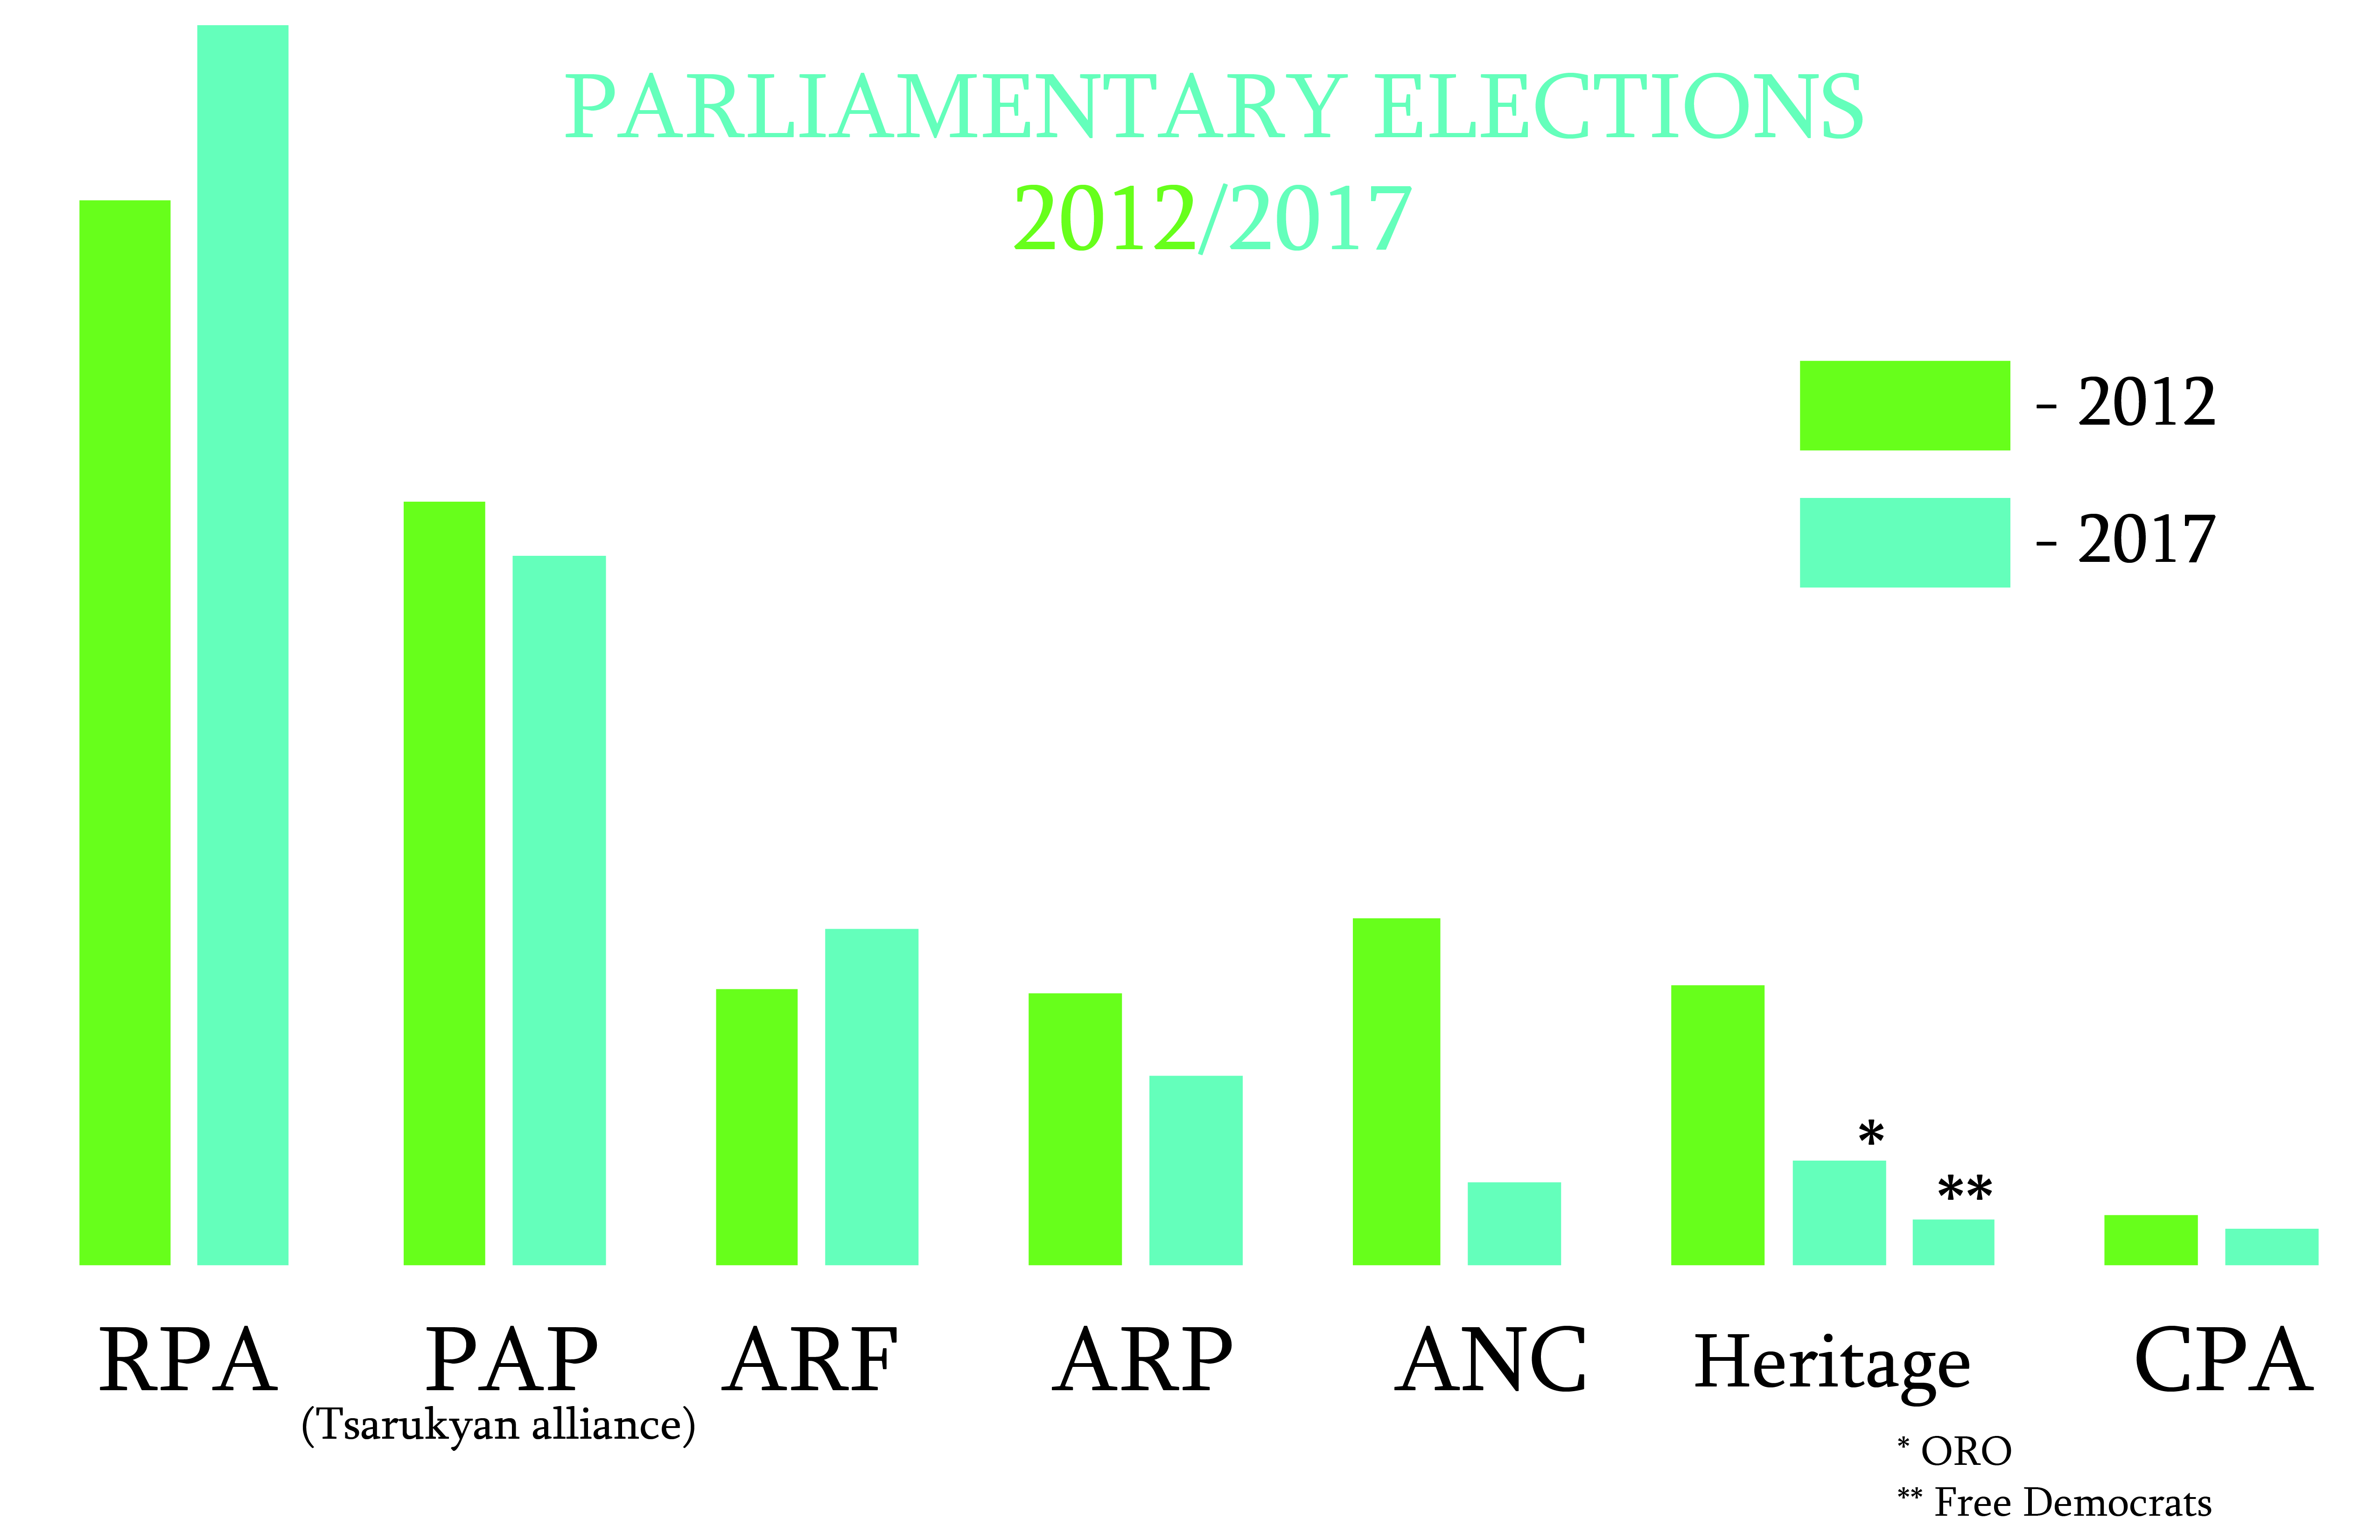 Parliamentary elections 2012/2017: Solely RPA and ARF secured growth